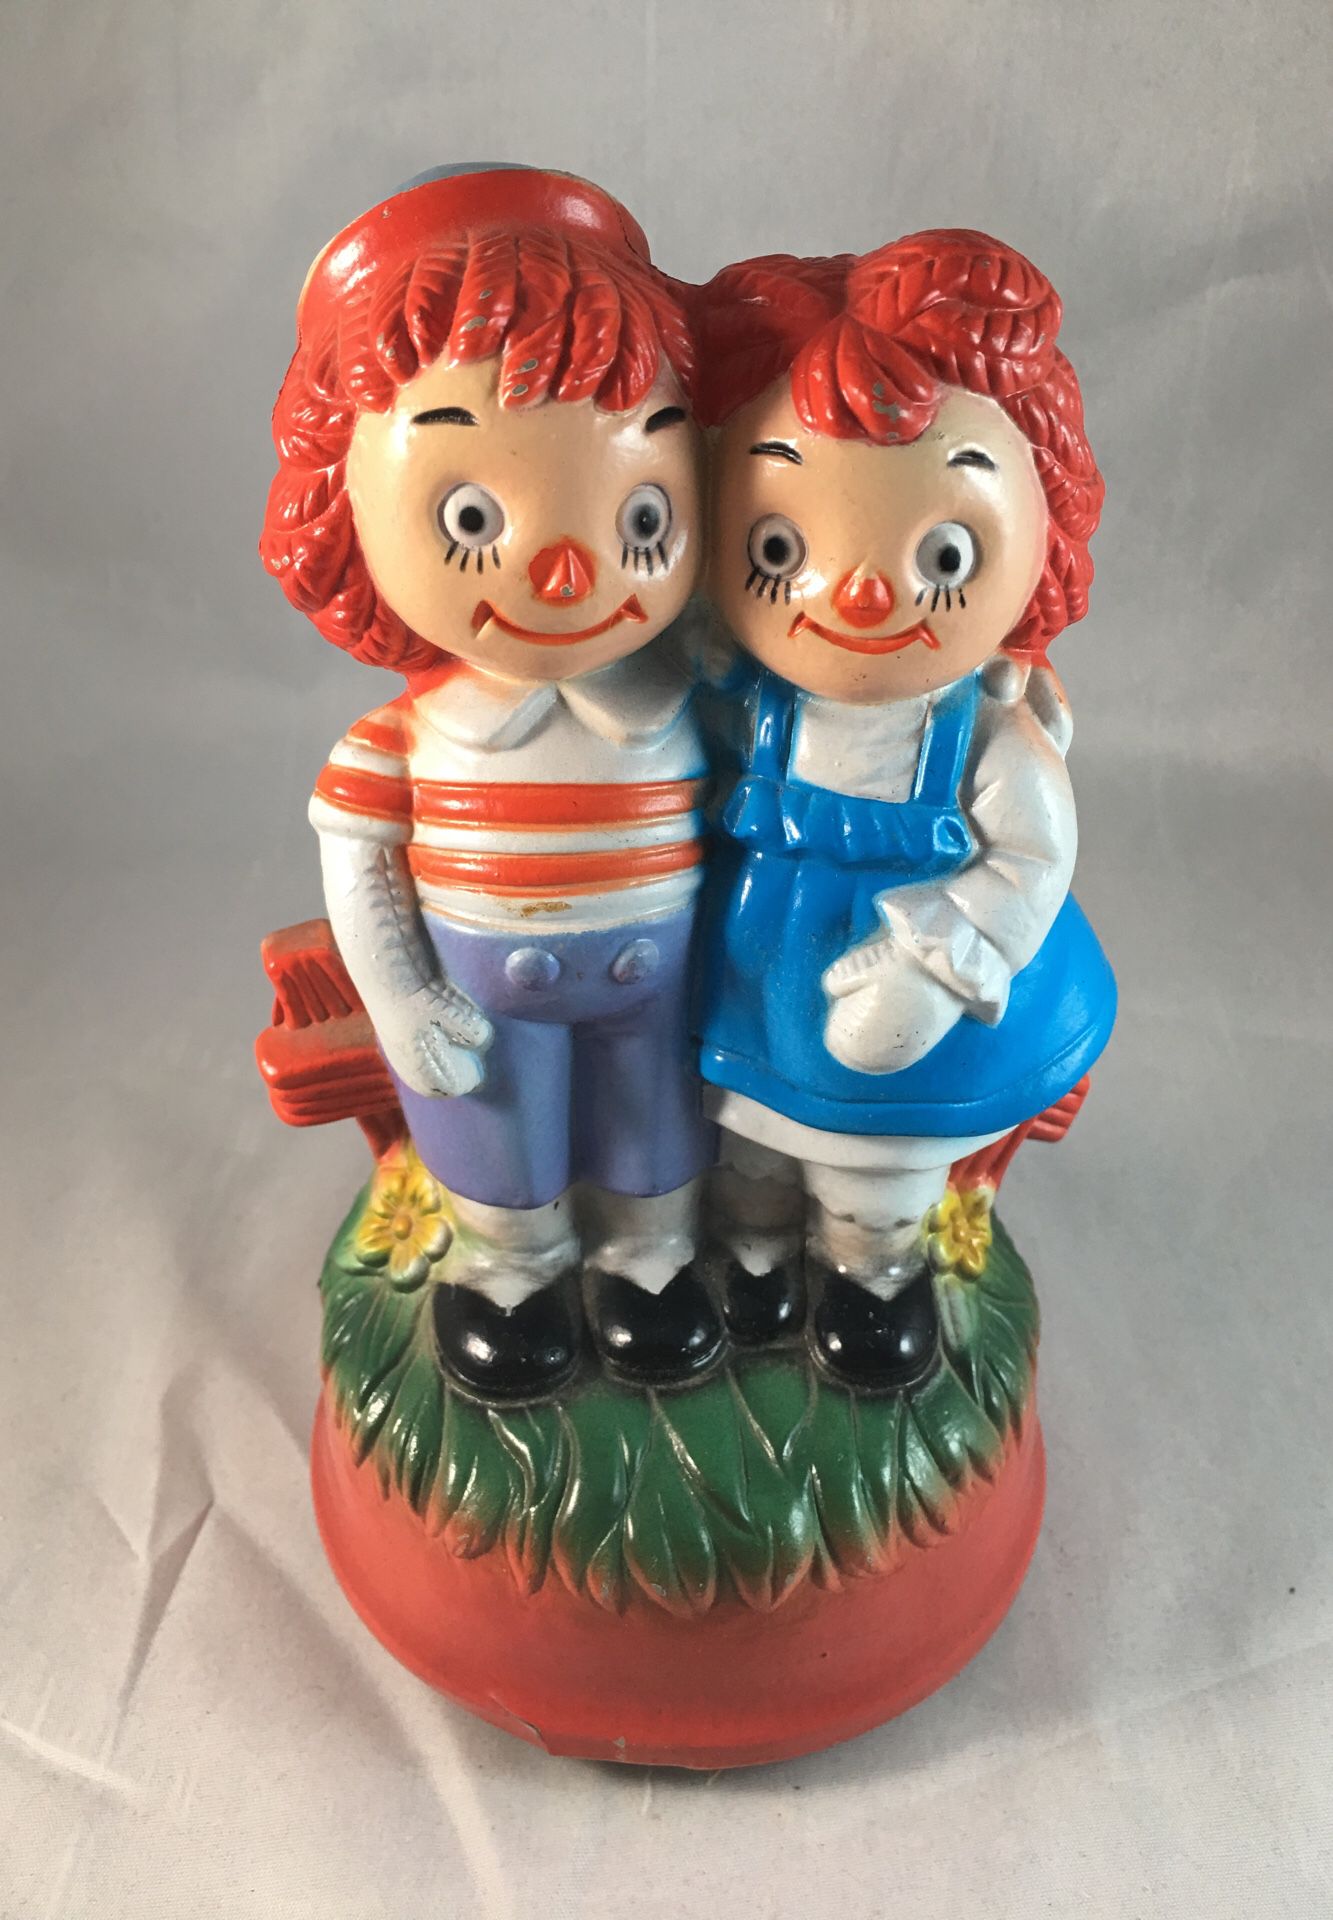 Raggedy Ann and Andy piece